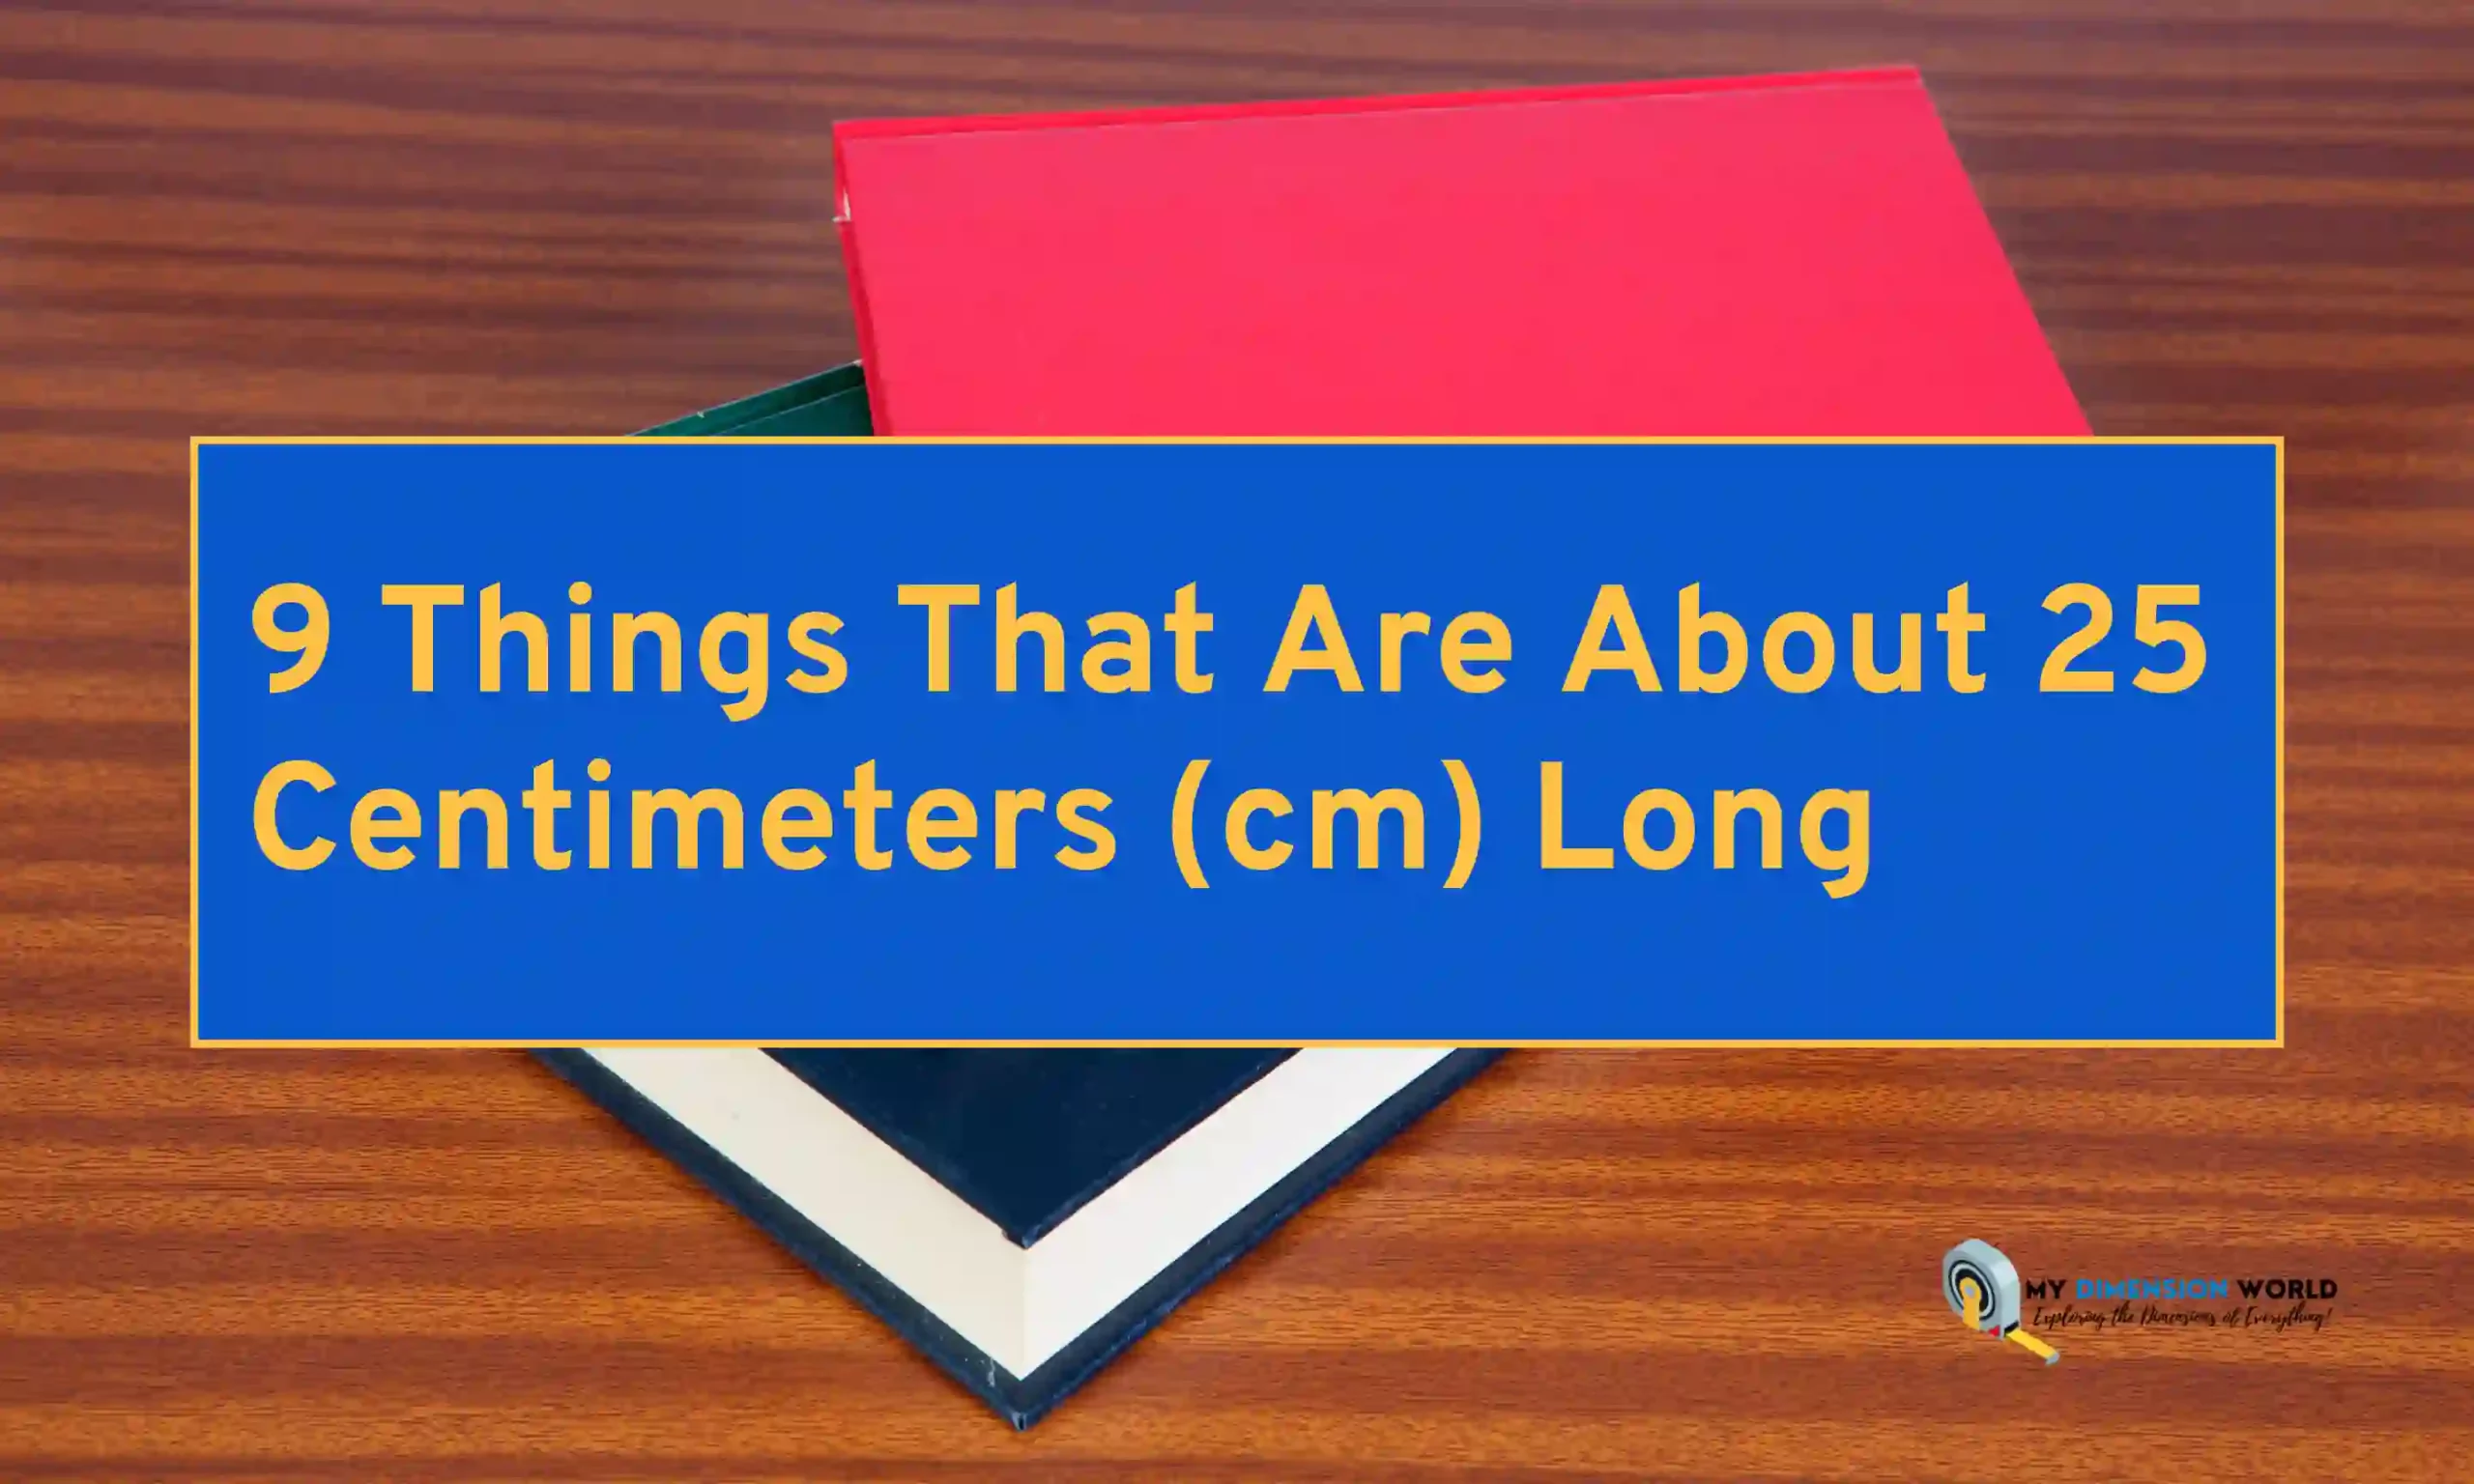 9 Things That Are About 25 Centimeters (cm) Long